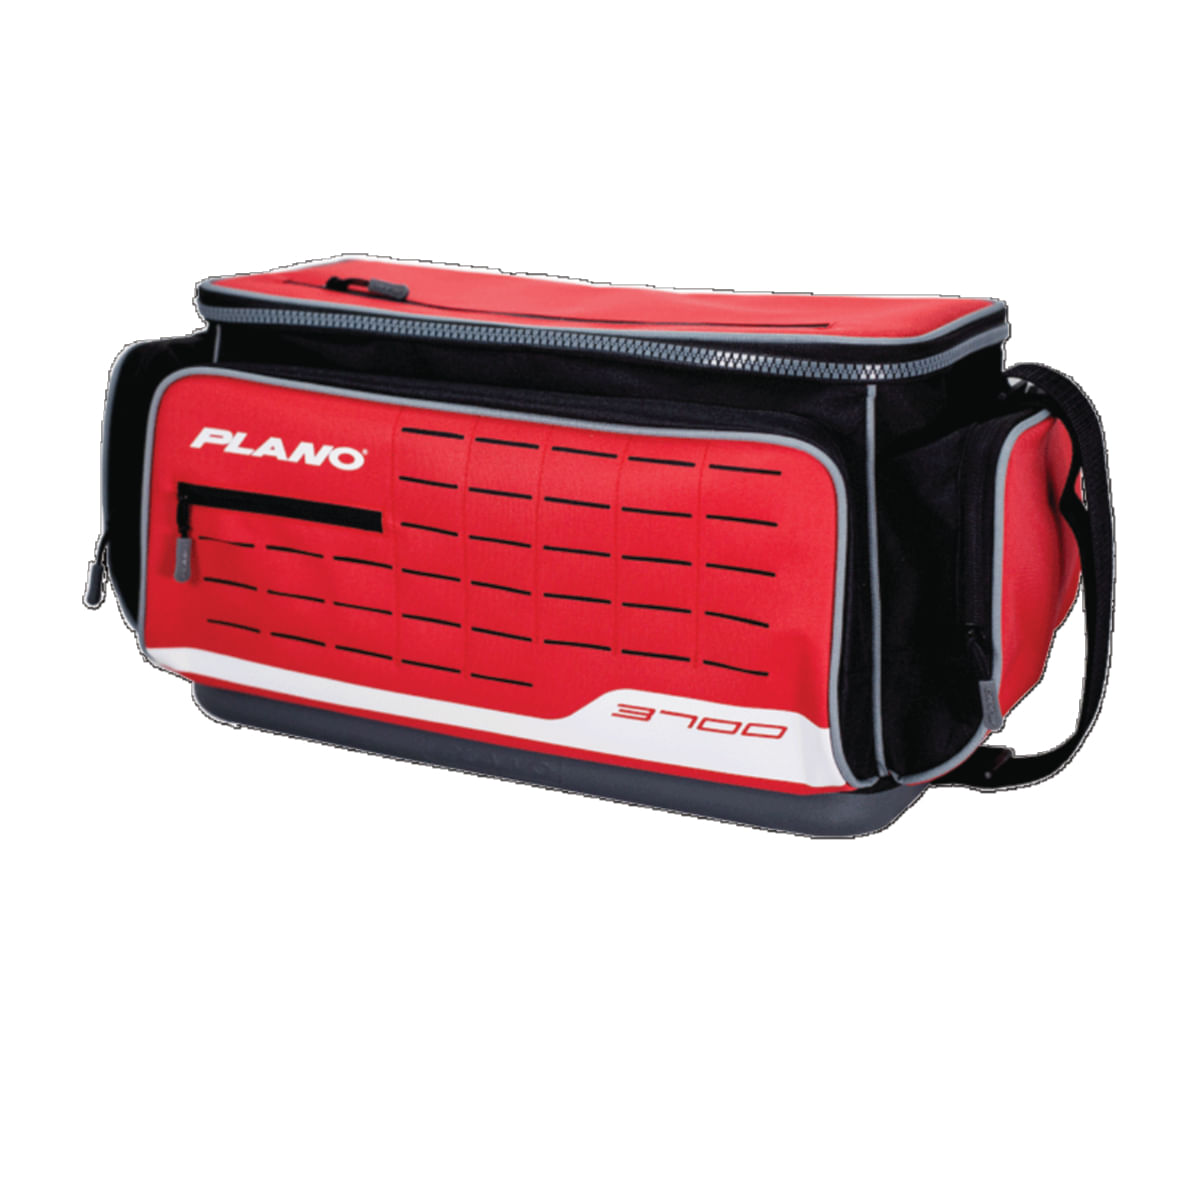 Plano Tackle Case, 3700 Deluxe, Weekend Series